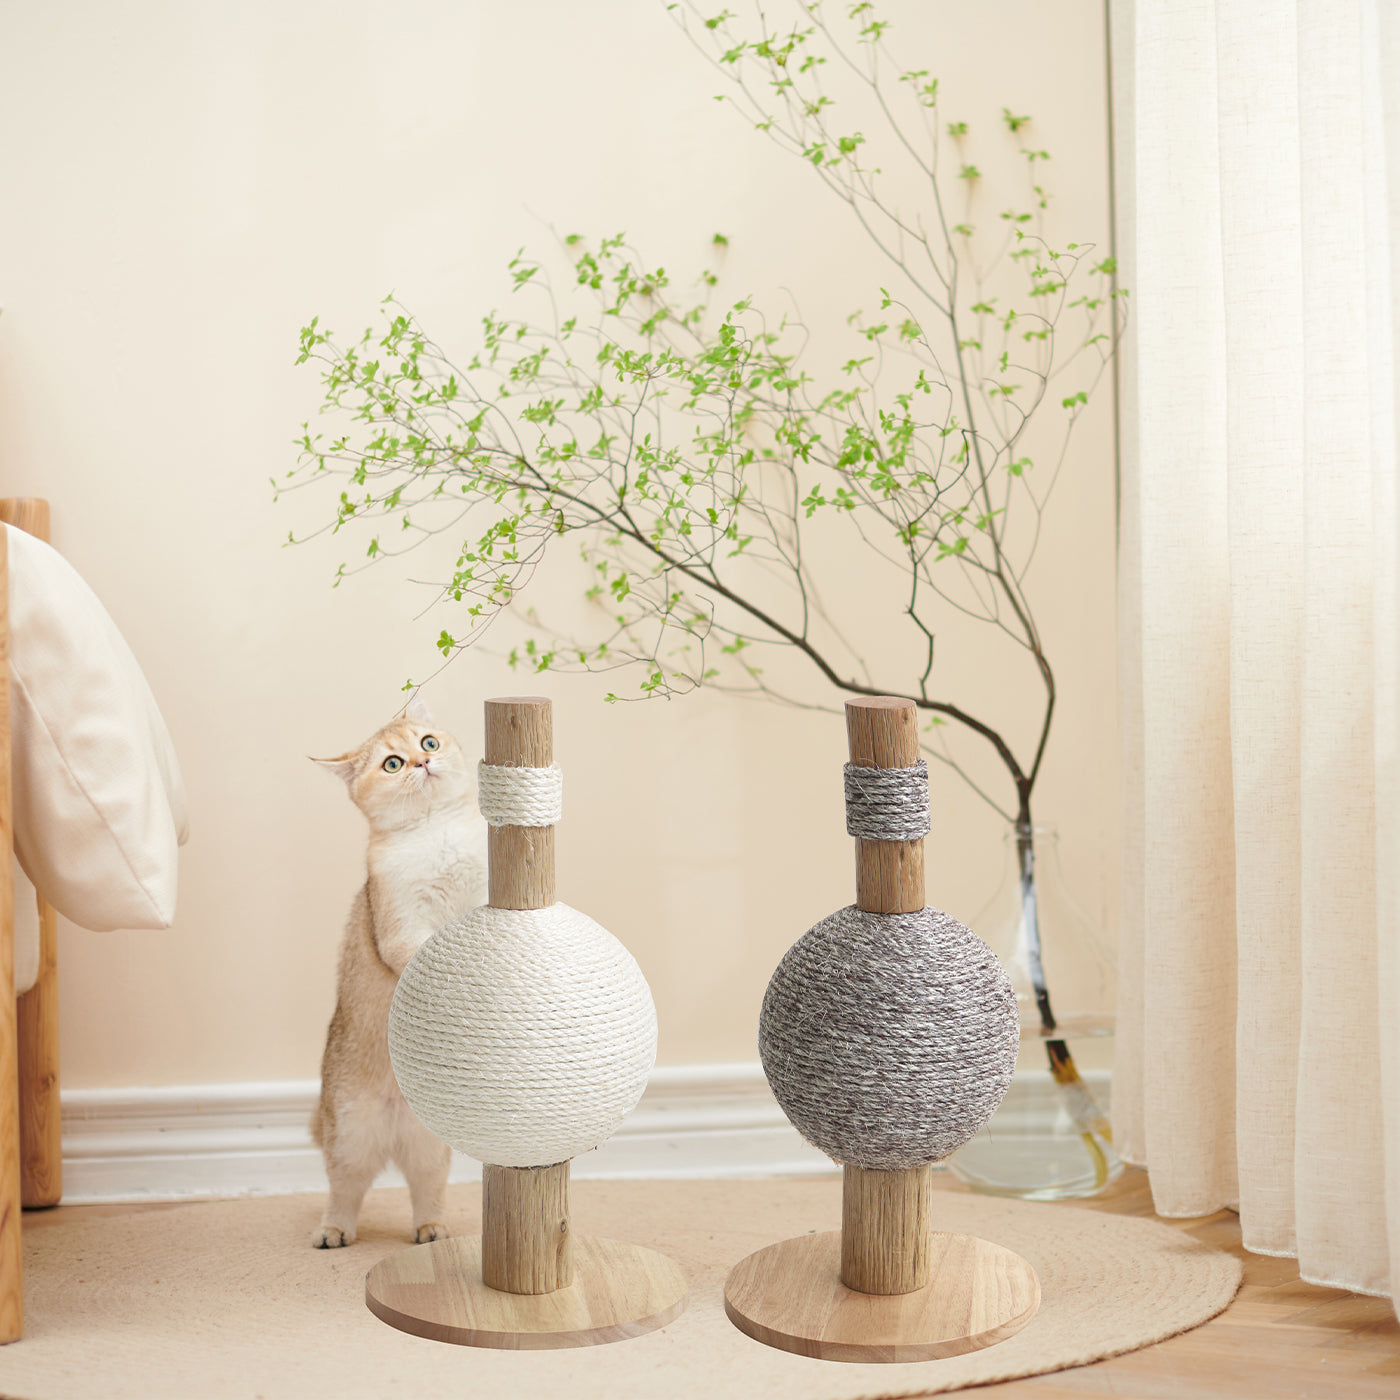 Discover Luxury For Cats & Kittens With Helsinki The Ball Cat Scratch Post in Ivory! Crafted Using Durable Wood And Featuring Sisal Ball Which Adds An Extra Texture For Scratching! Available Now at Lords & Labradors